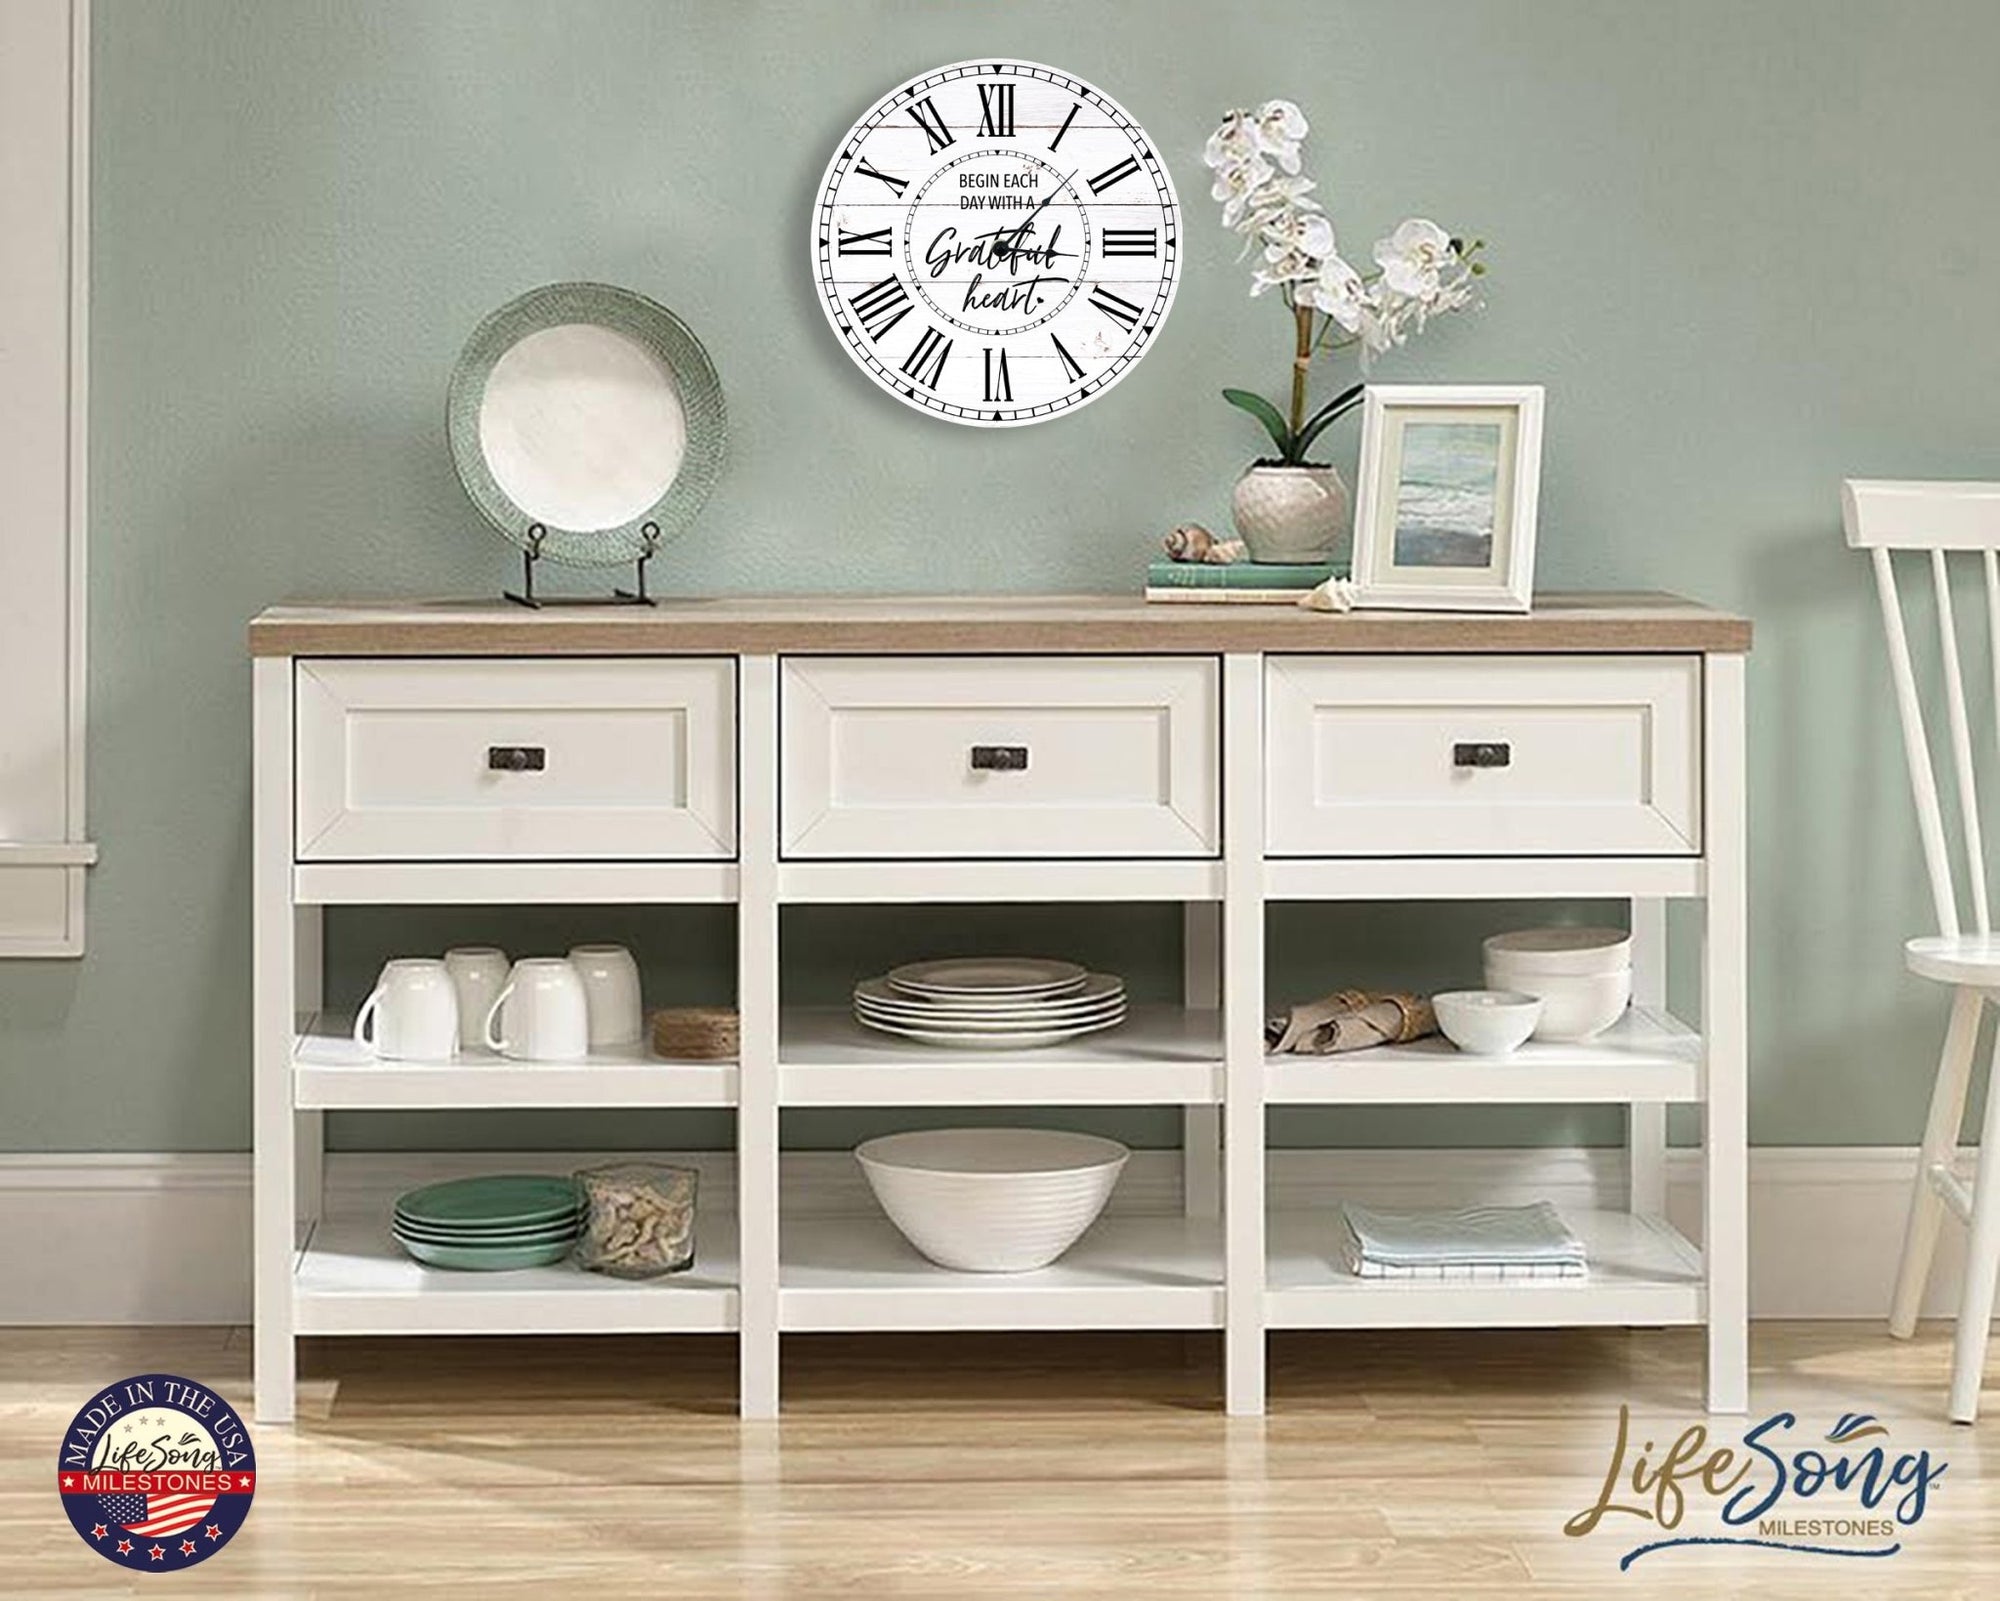 Everyday Home and Family Clock 12” x .0125” Begin Each Day - LifeSong Milestones